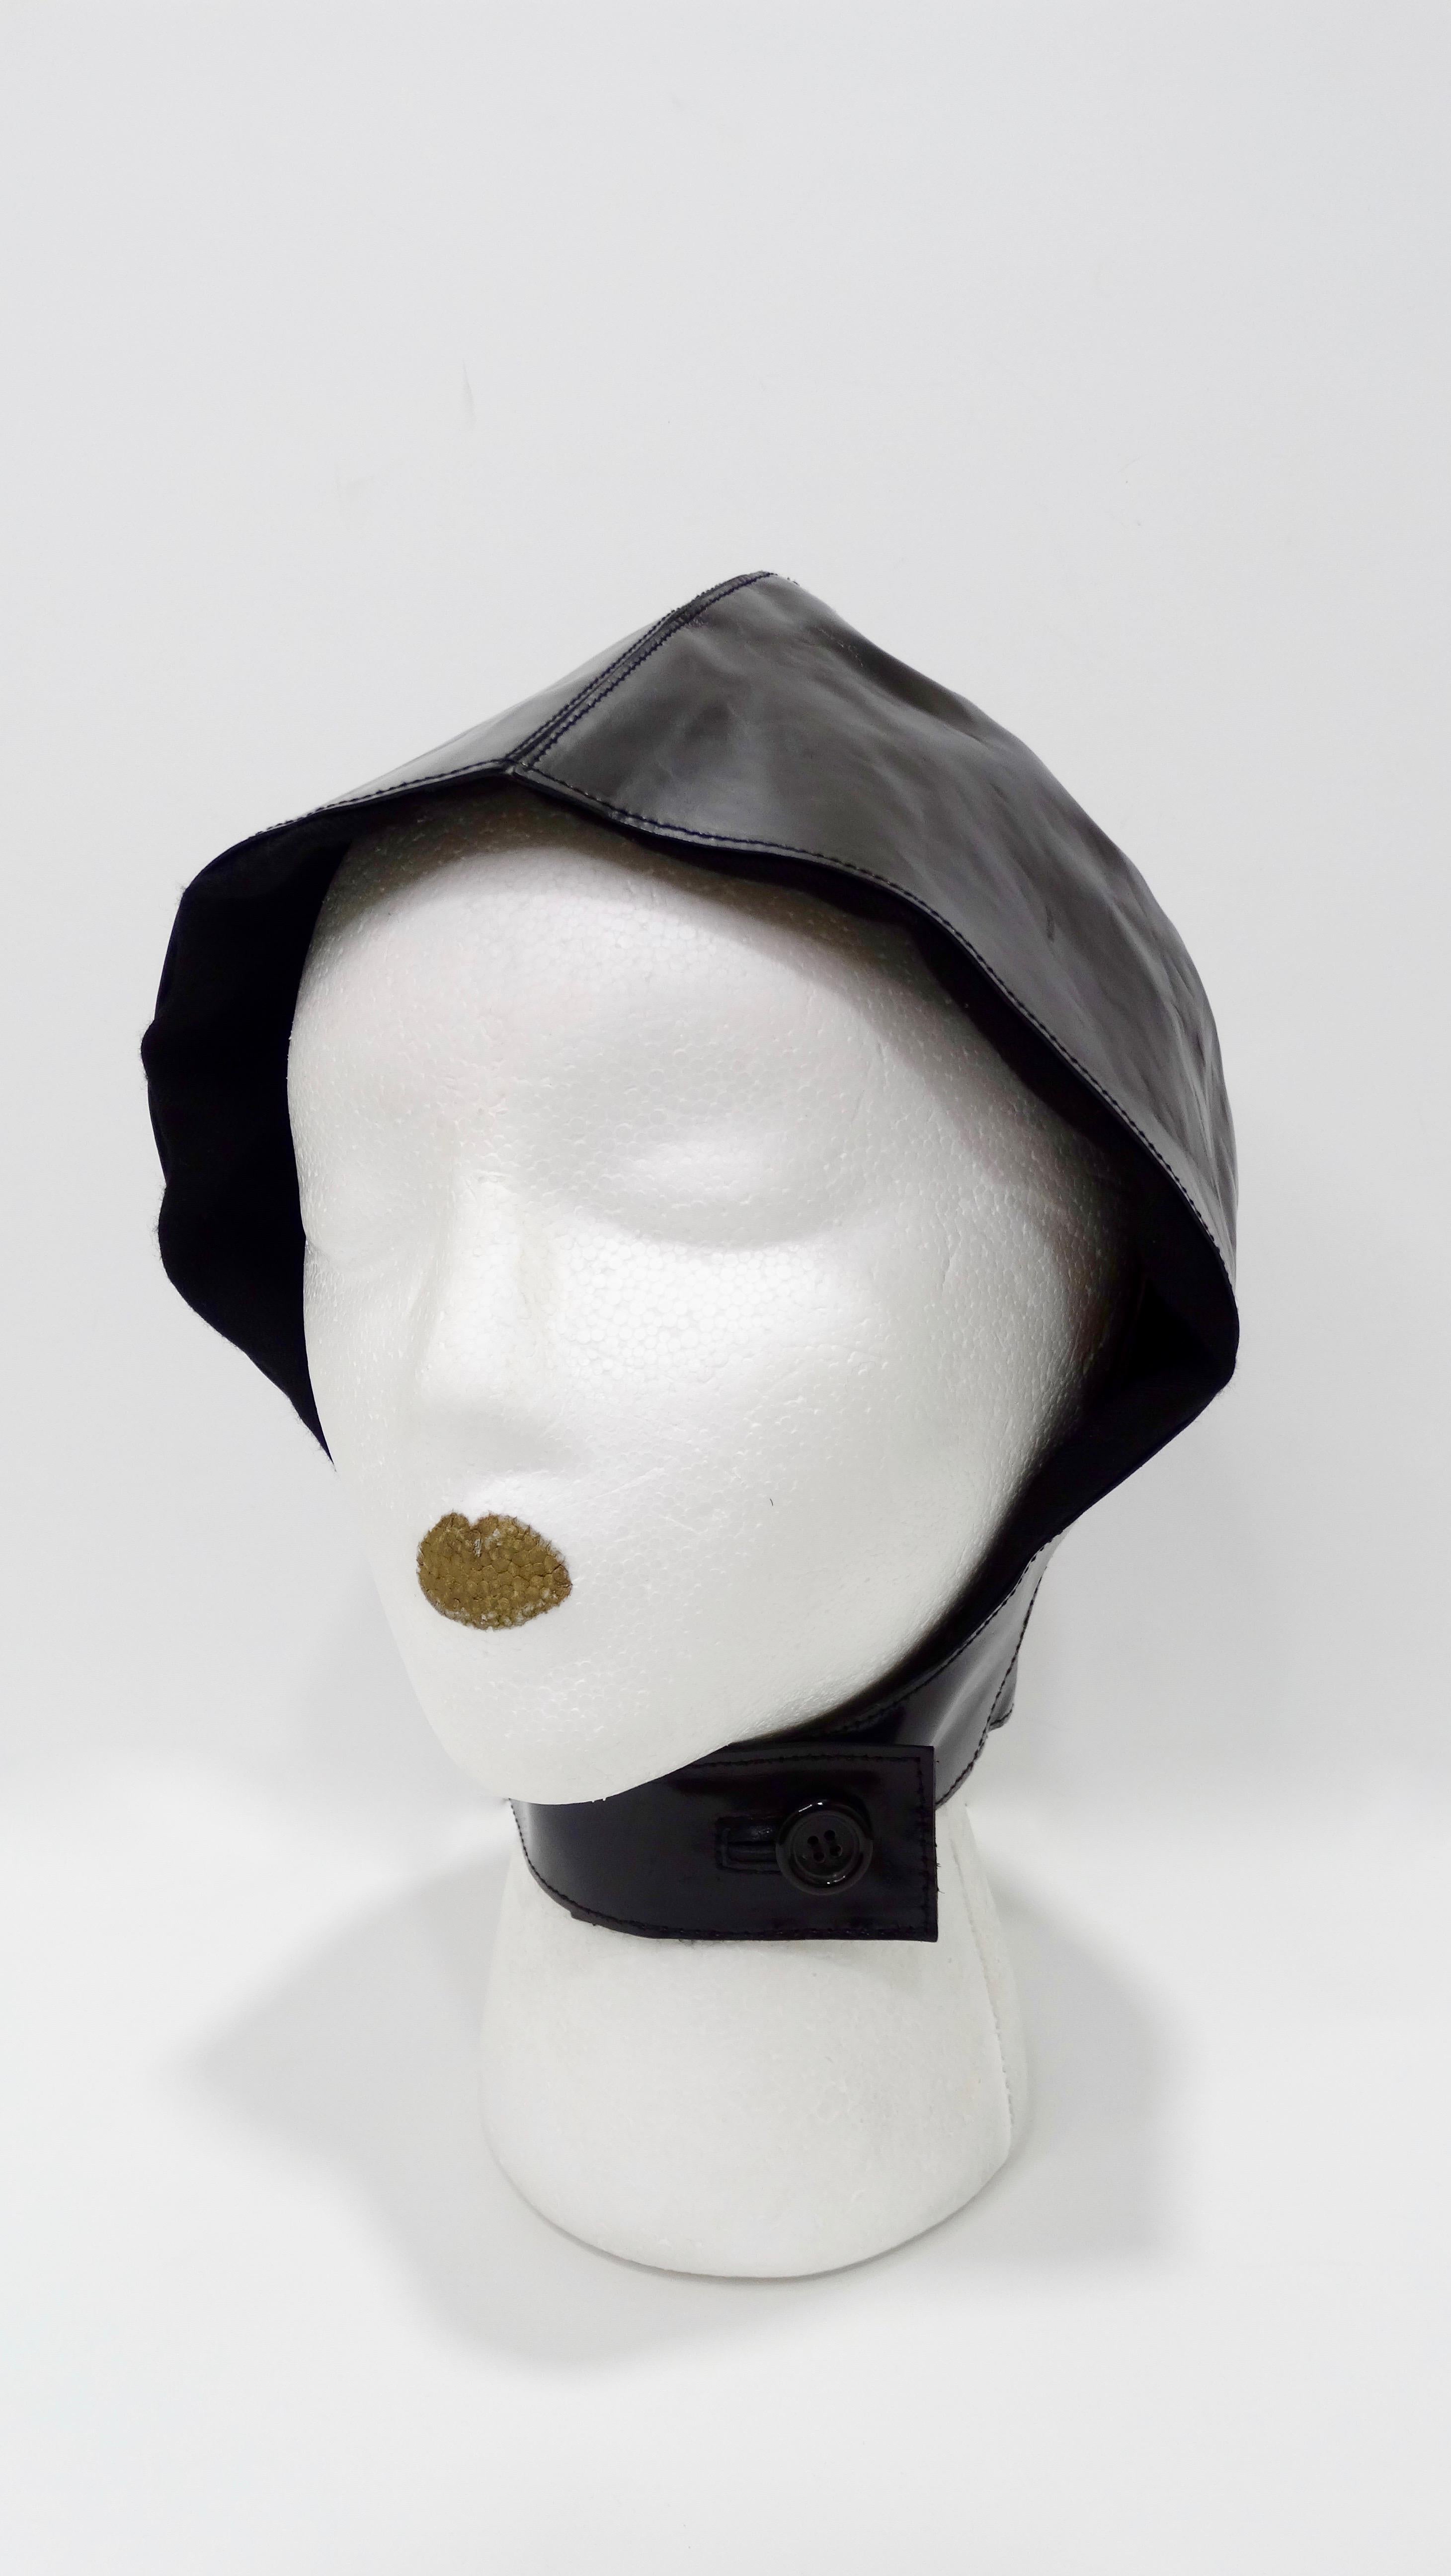 Straight from the Tom Ford archives! Circa 2003 from YSL's S/S collection, this flight cap is crafted from a shiny smooth black patient leather and is lined with cashmere and silk. Features a neckband that can be securely buttoned. Unique and a true